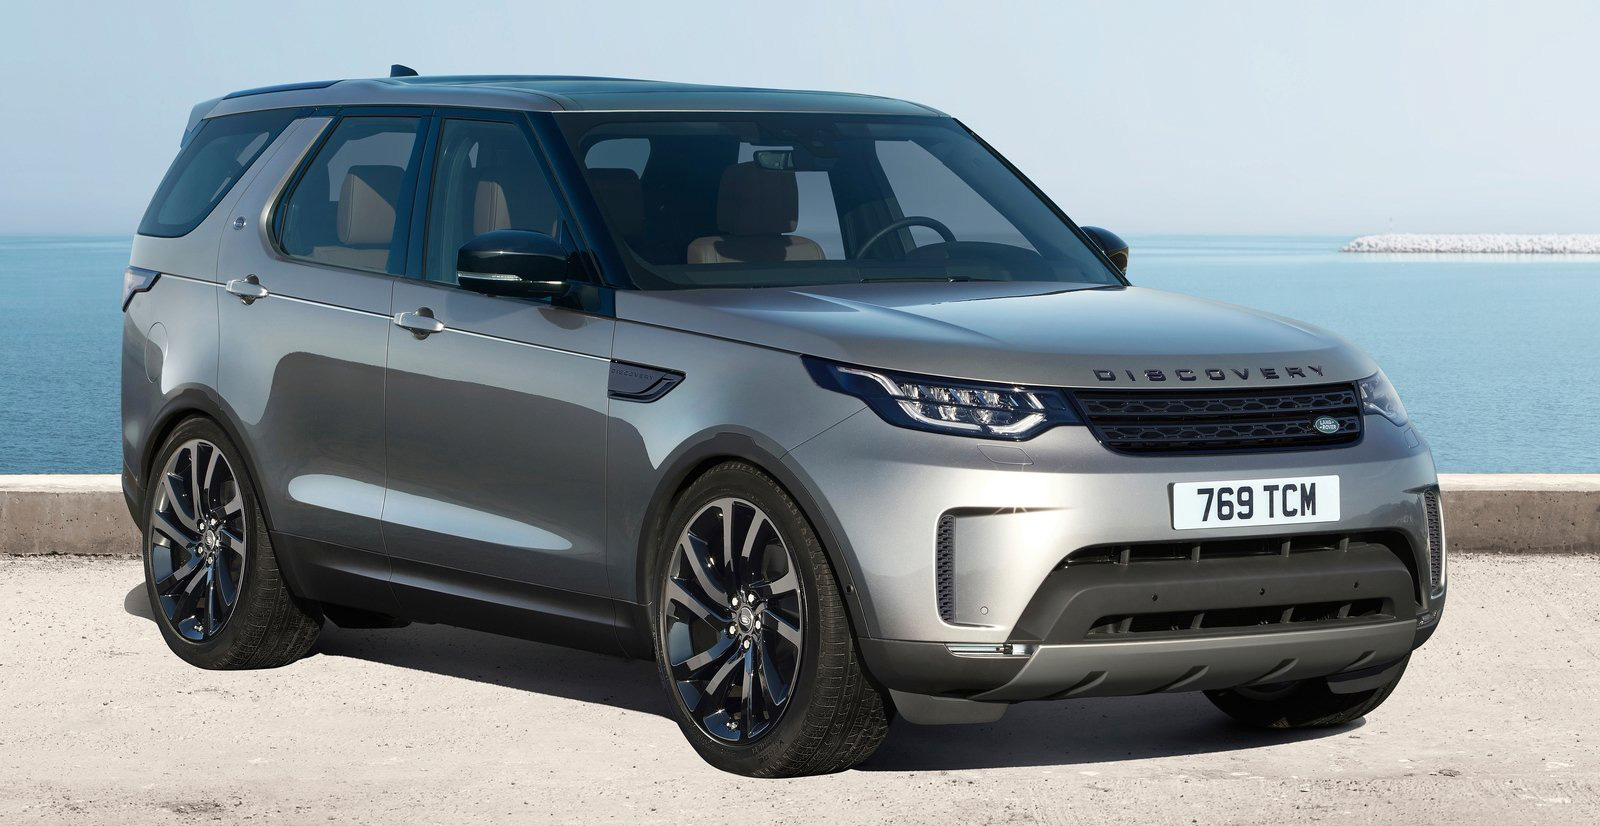 New Land Rover Discovery full 7seater, 480 kg lighter